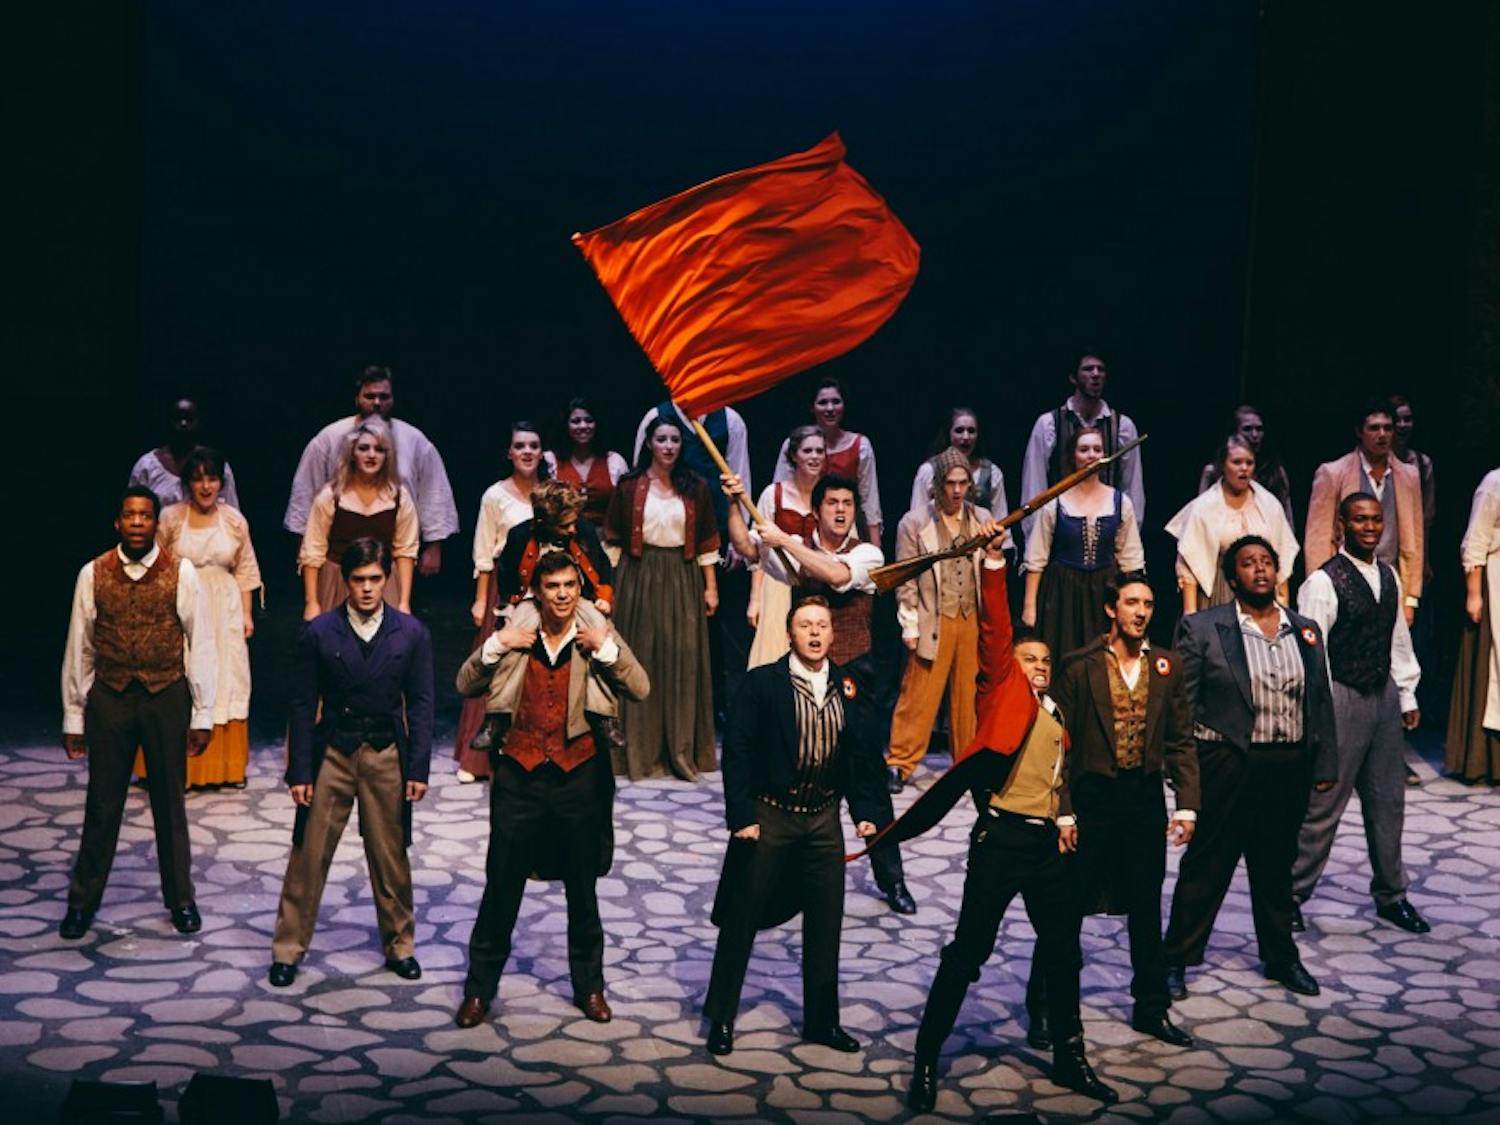 	The students of the revolution come to the iconic Les Miserables pyramid during the dramatic end to the first act. The revolutionaries are led by Enjolras, played by junior musical theatre major Jared Howelton. 